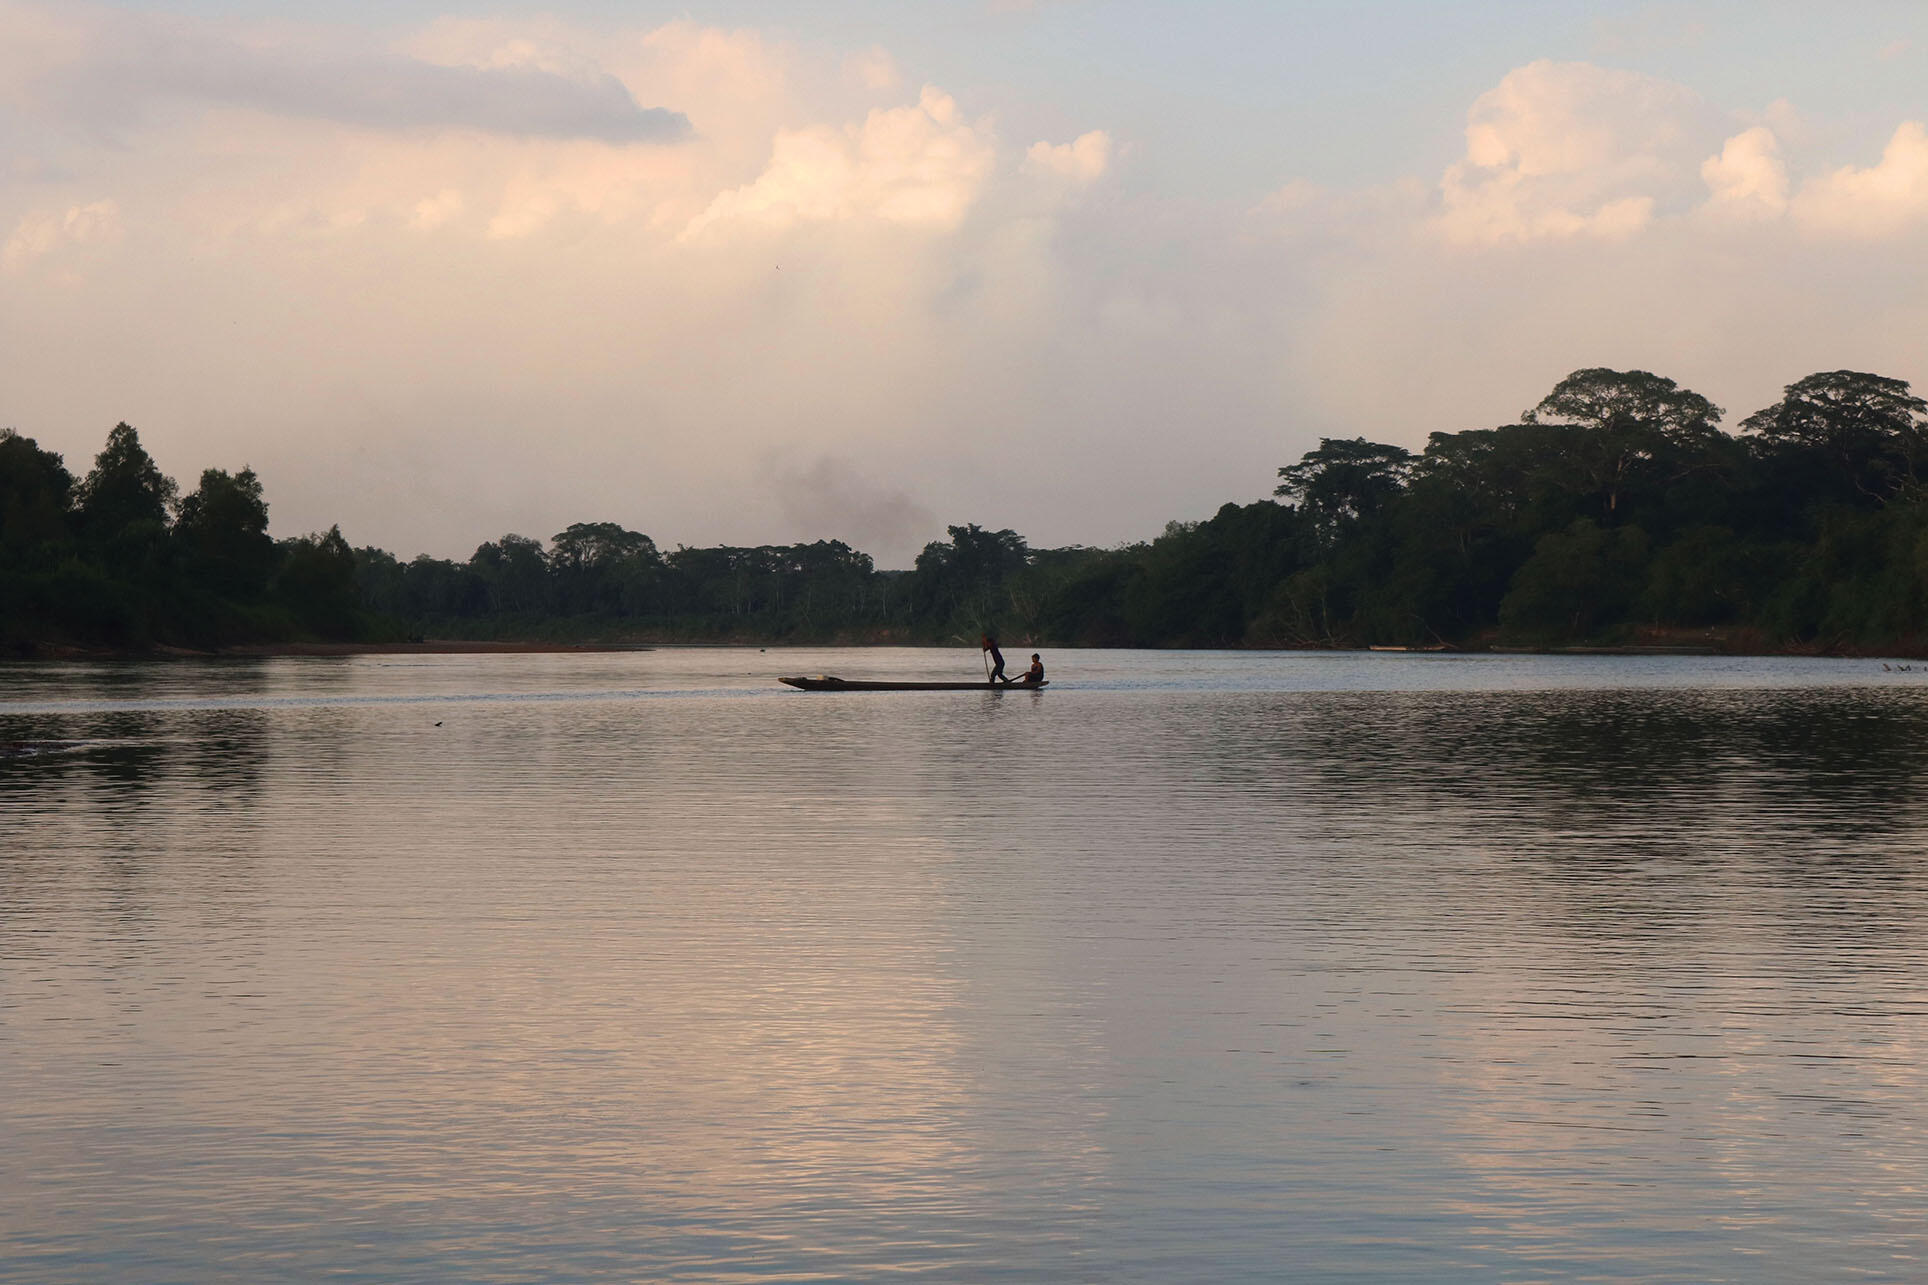 A boat with two men crosses the calm waters of Río Patuca in an indigenous bioreserve in Honduras.  (Photo by Marcio Martínez.)